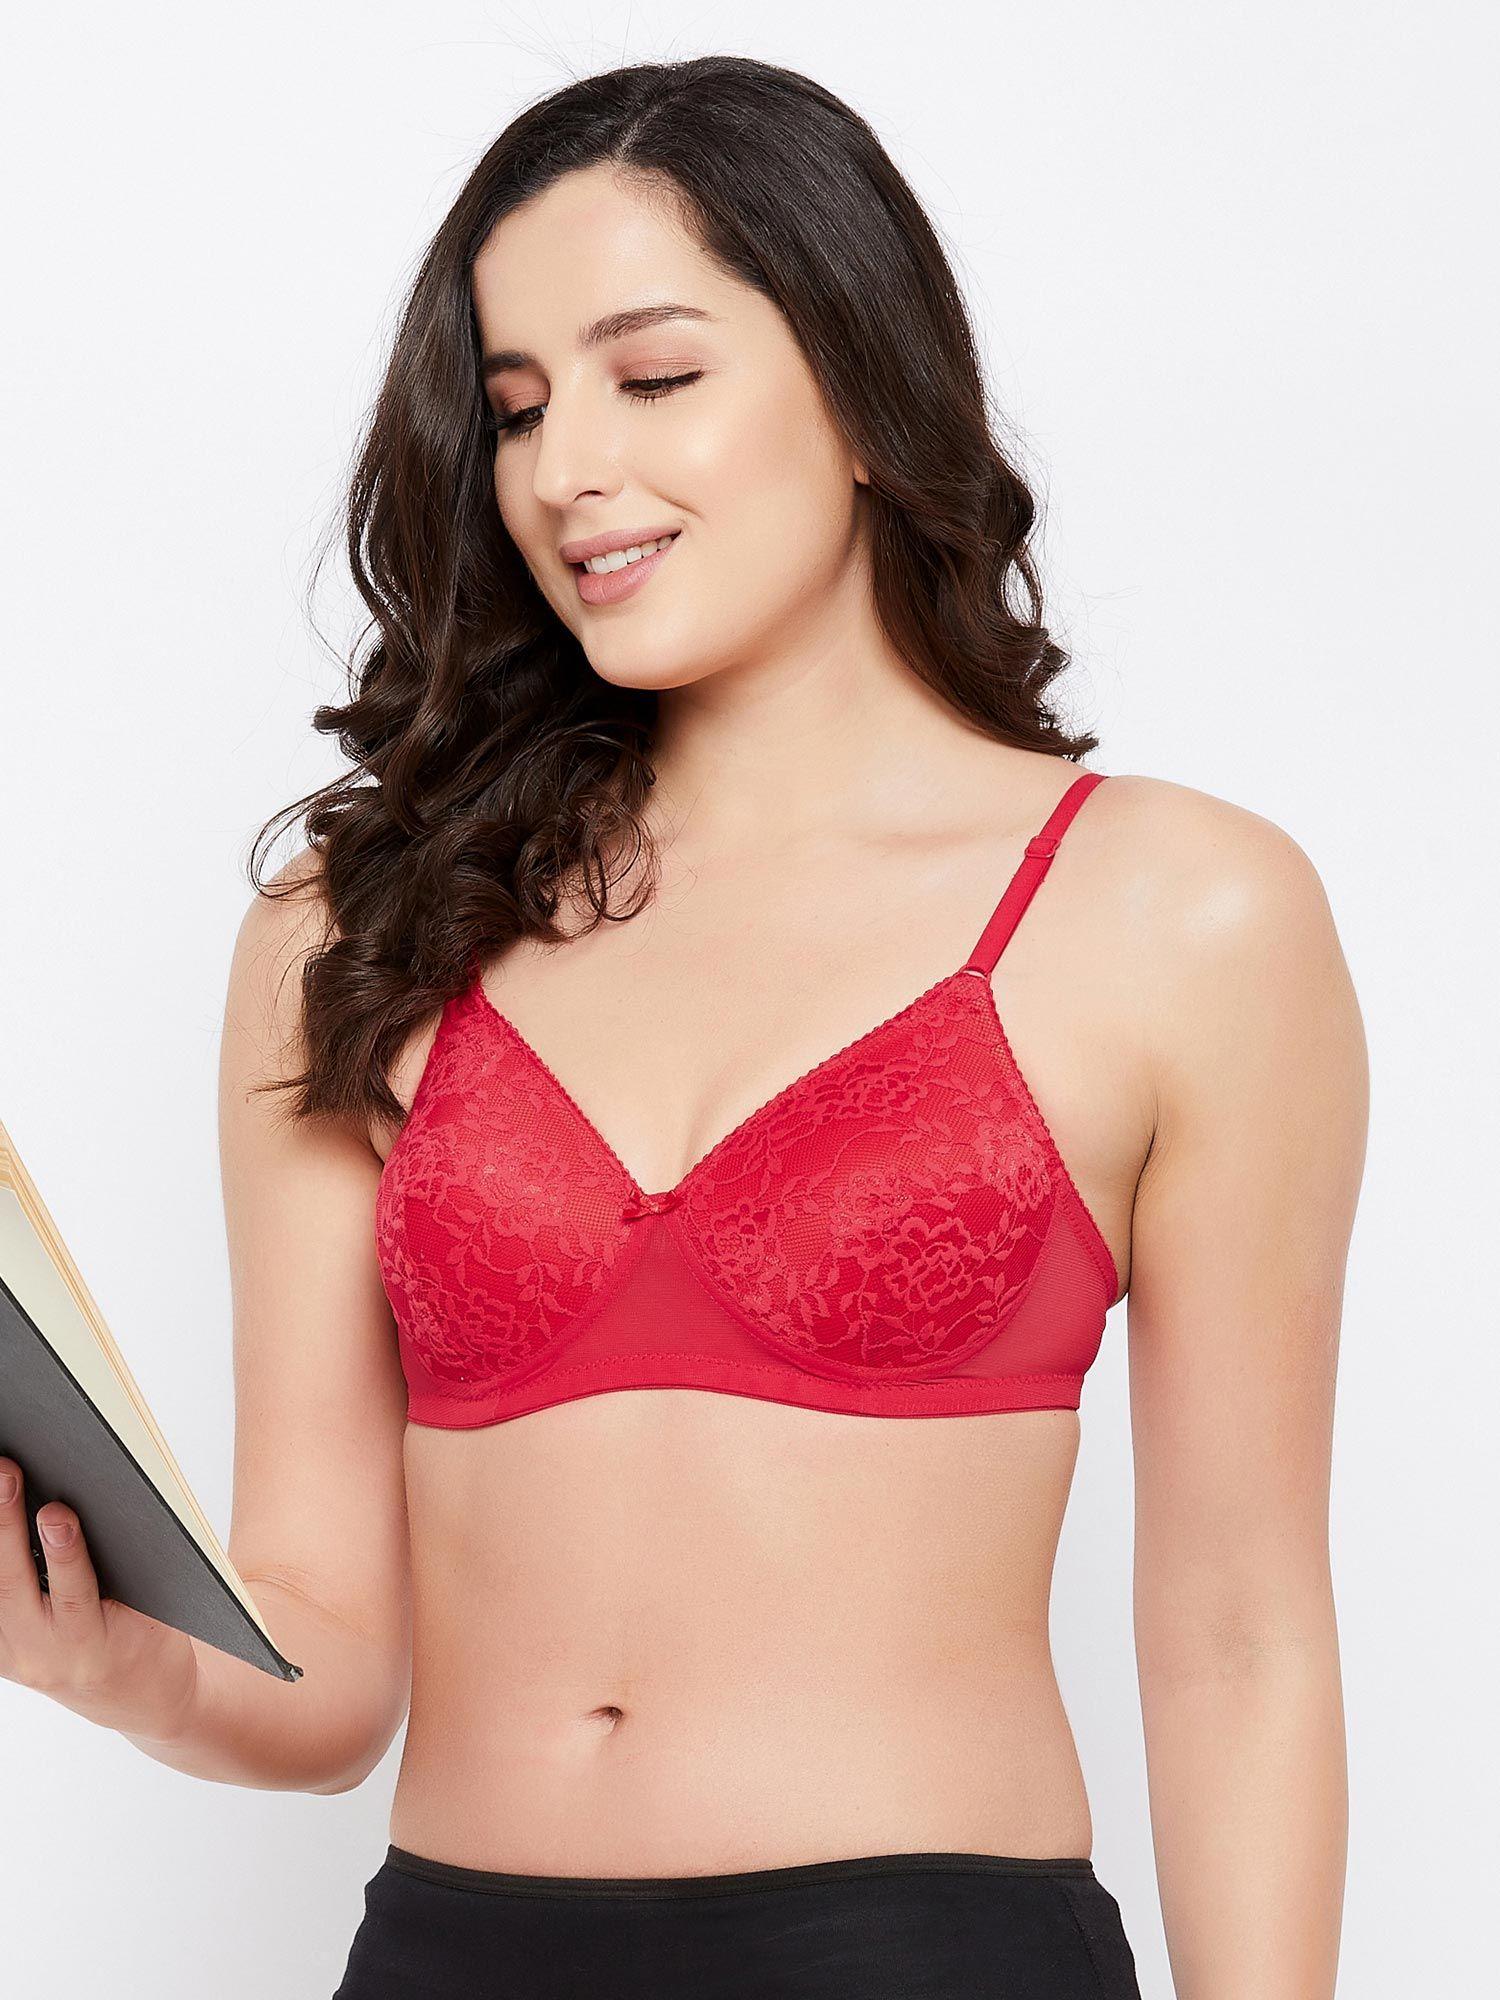 padded-non-wired-full-cup-t-shirt-bra-in-red---lace